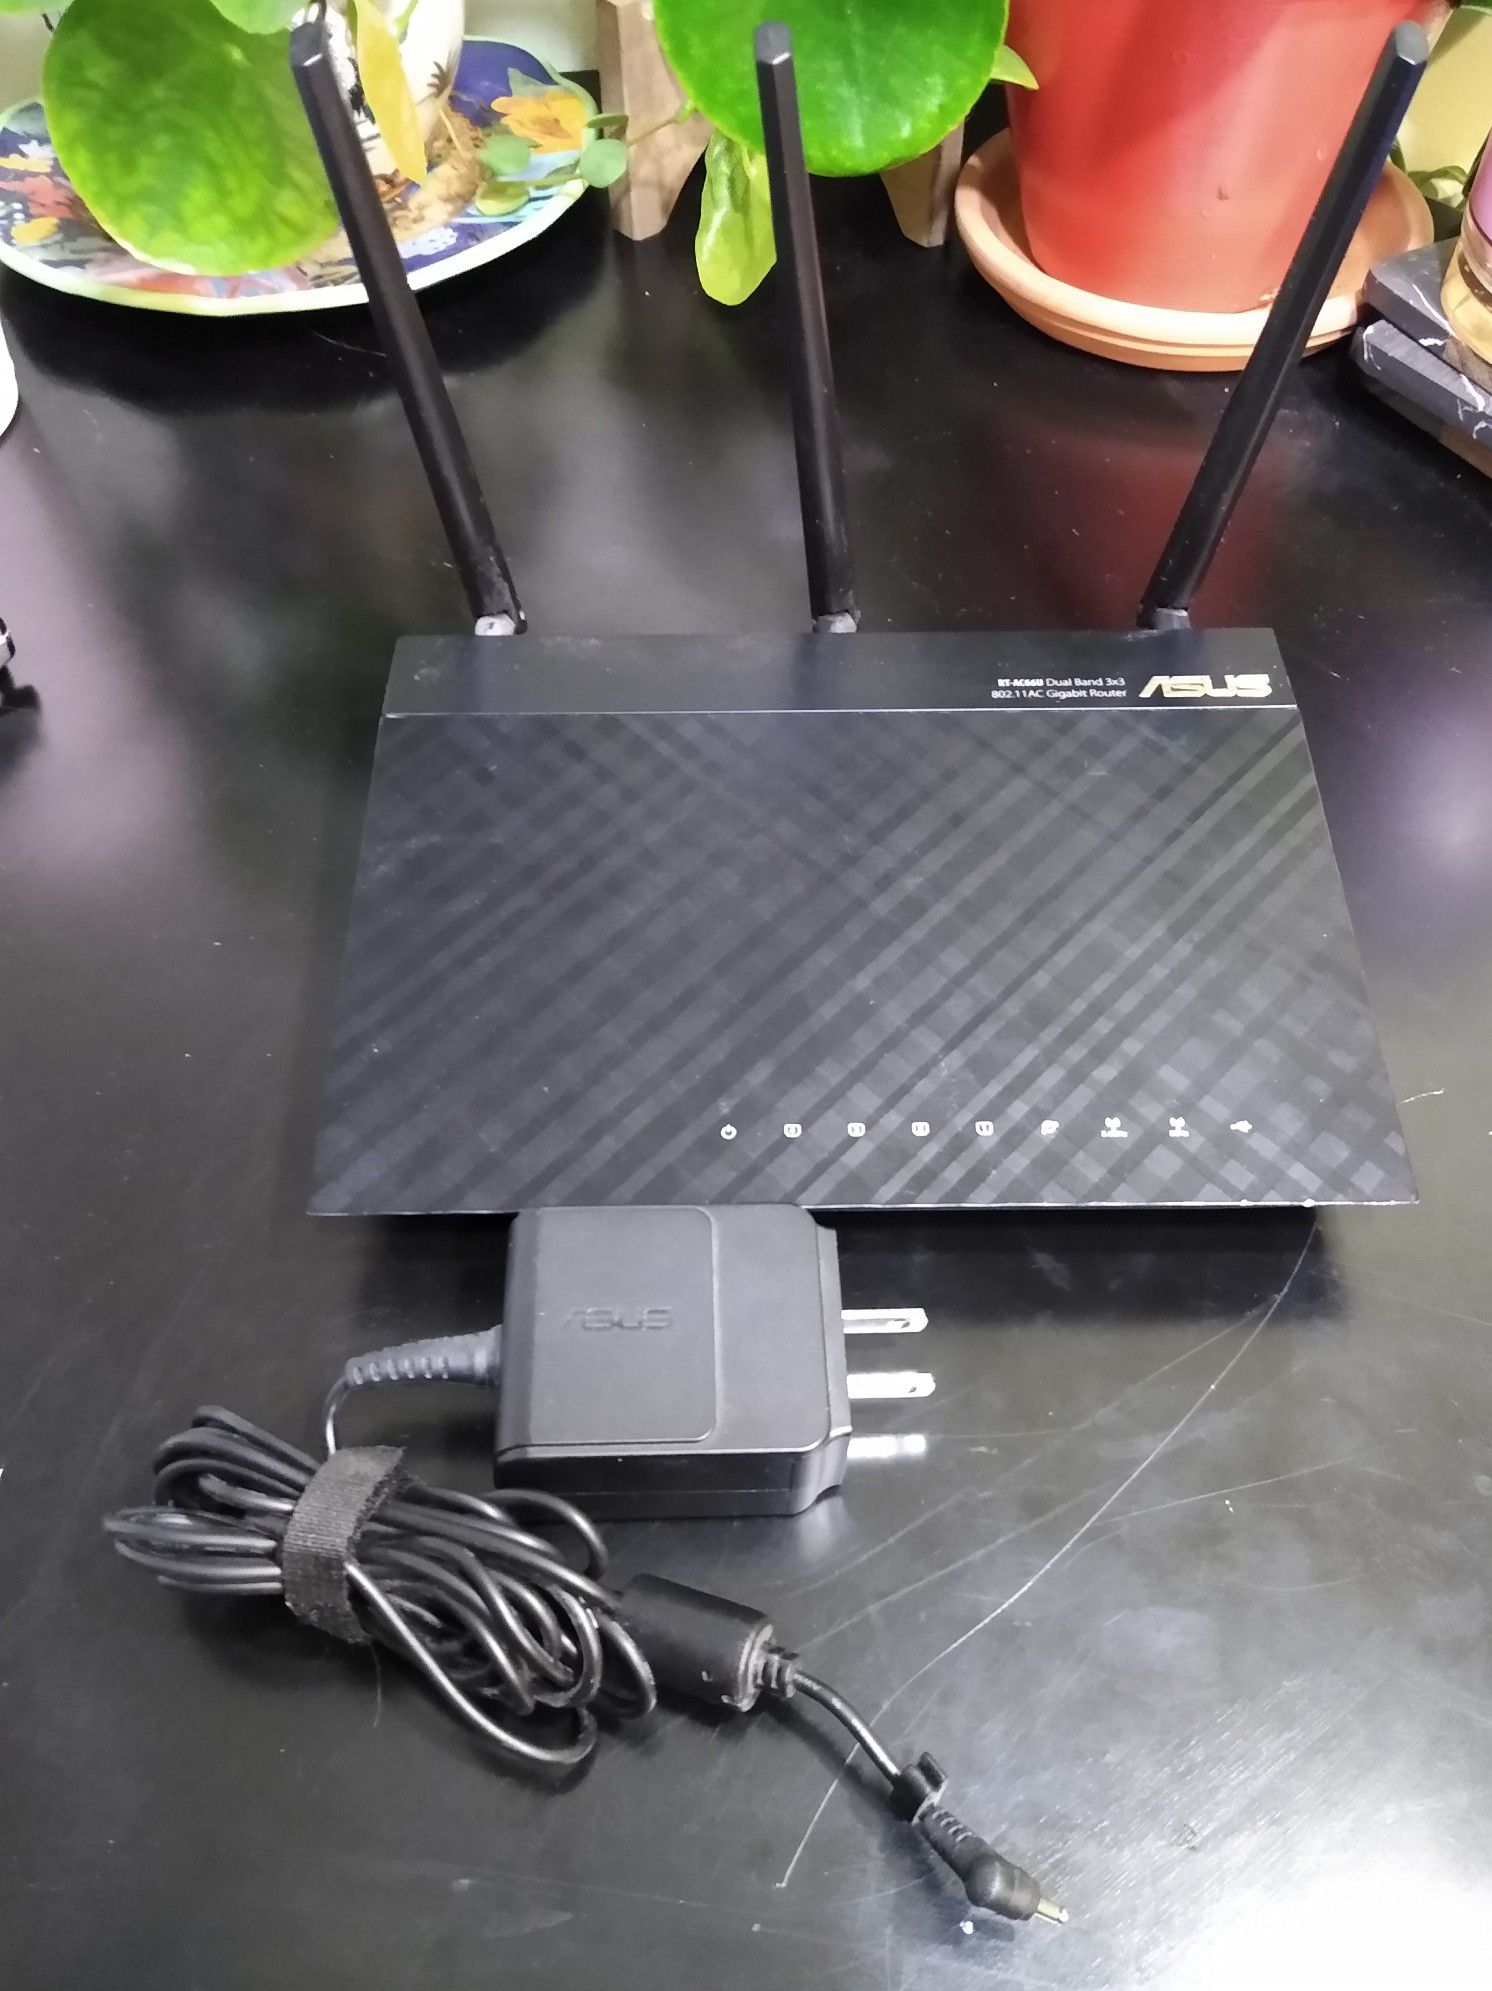 ASUS RT-AC66U Dual Band Router